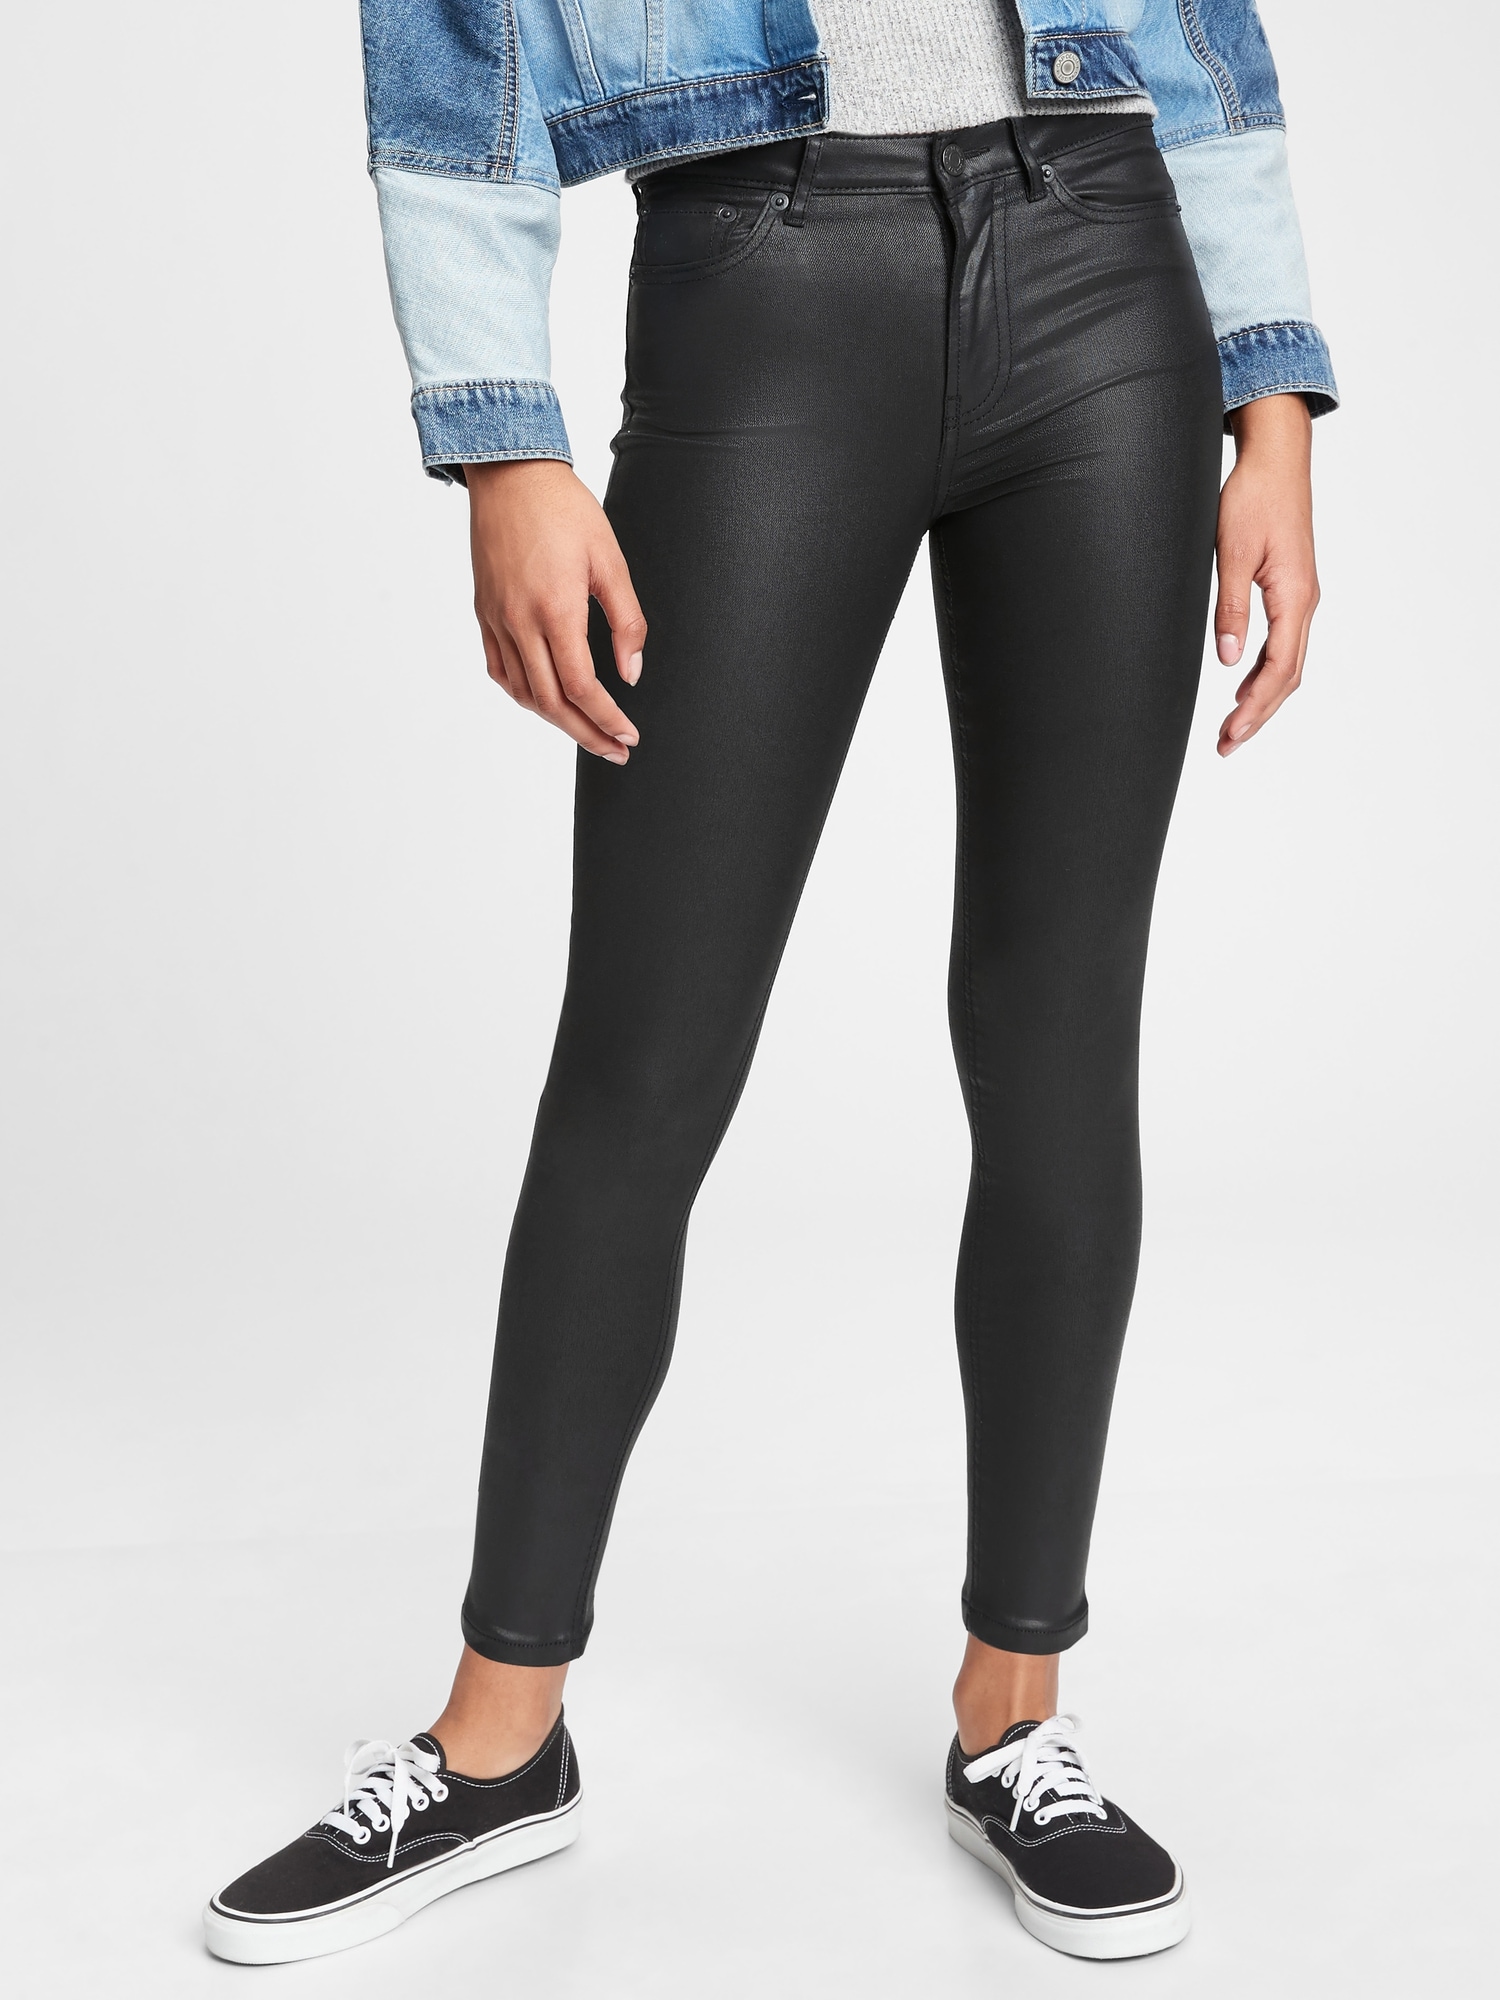 gap coated jeans